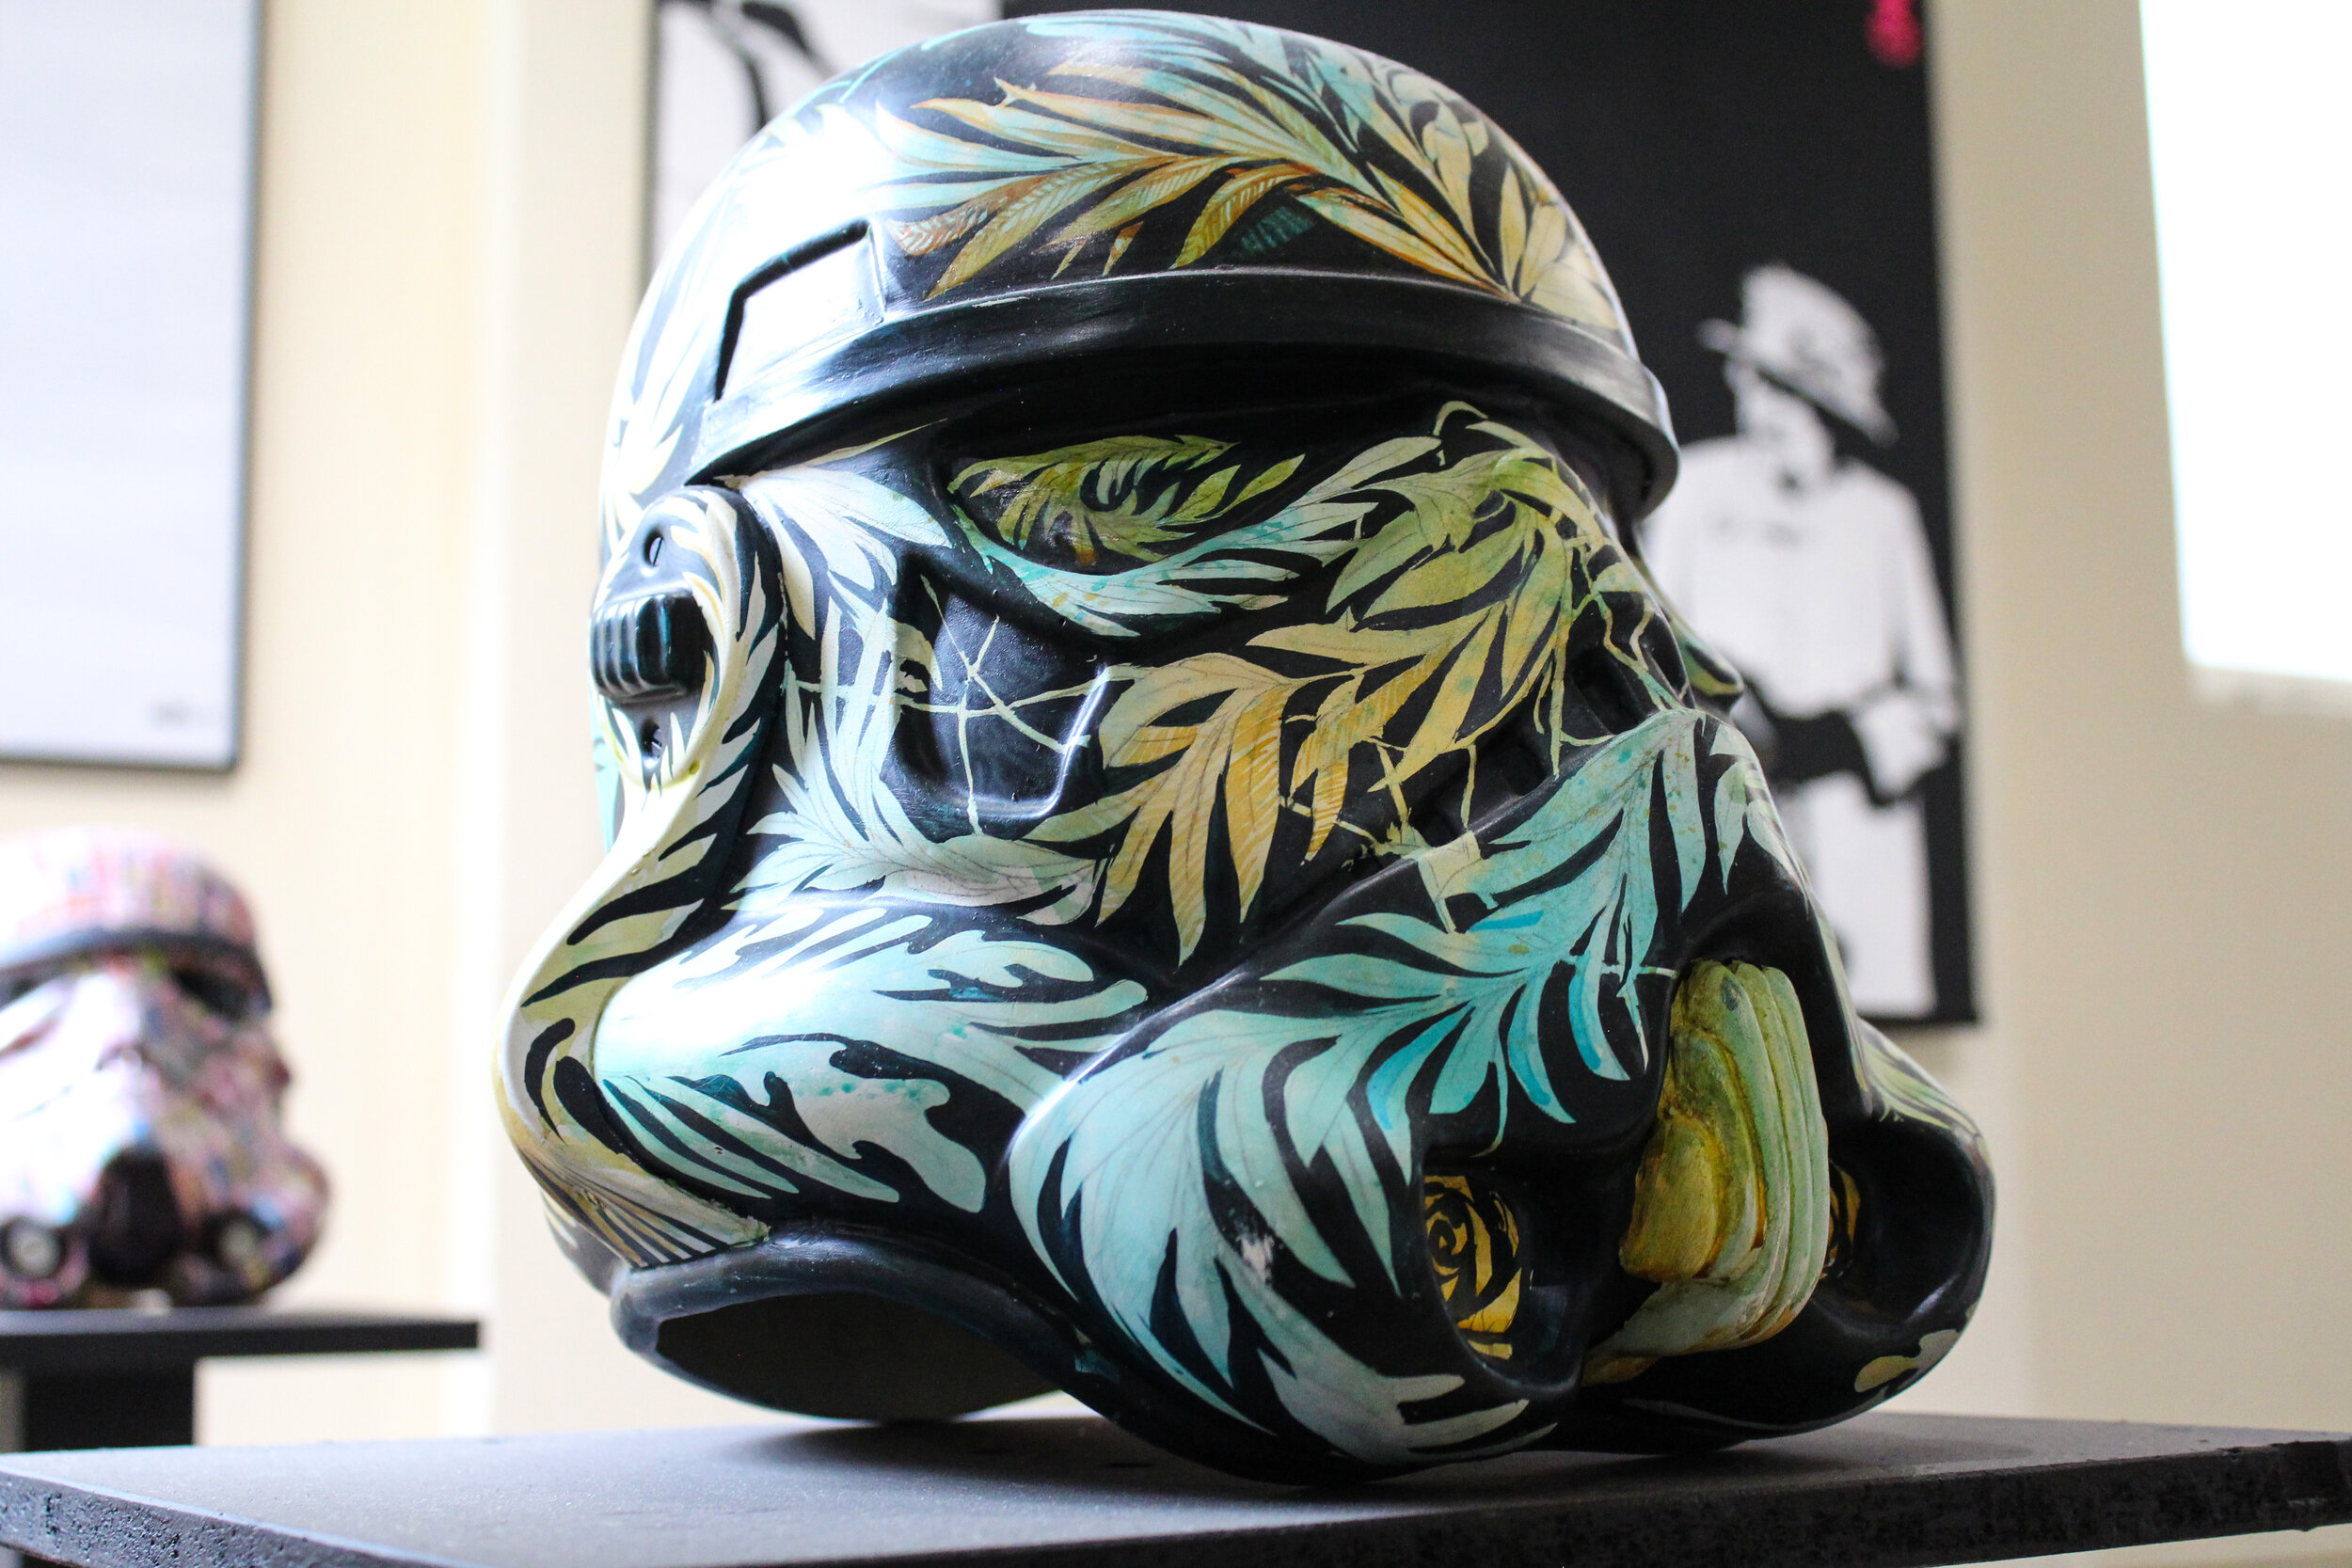 Stormtrooper Helmet, A Force of Nature by Carne Griffiths